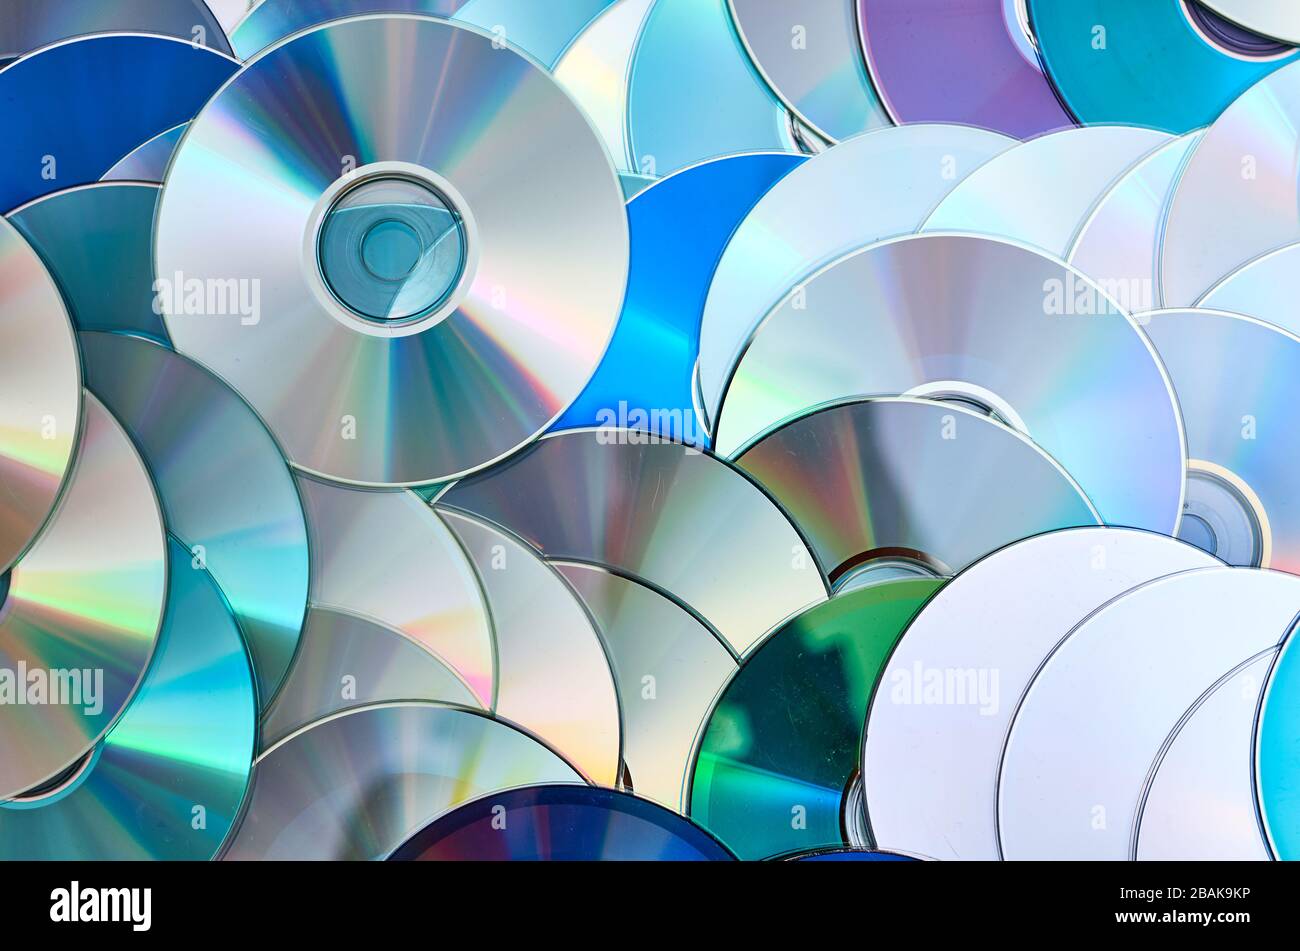 Group of old CD DVD compact optical disk storage medium with dust and scratches Stock Photo